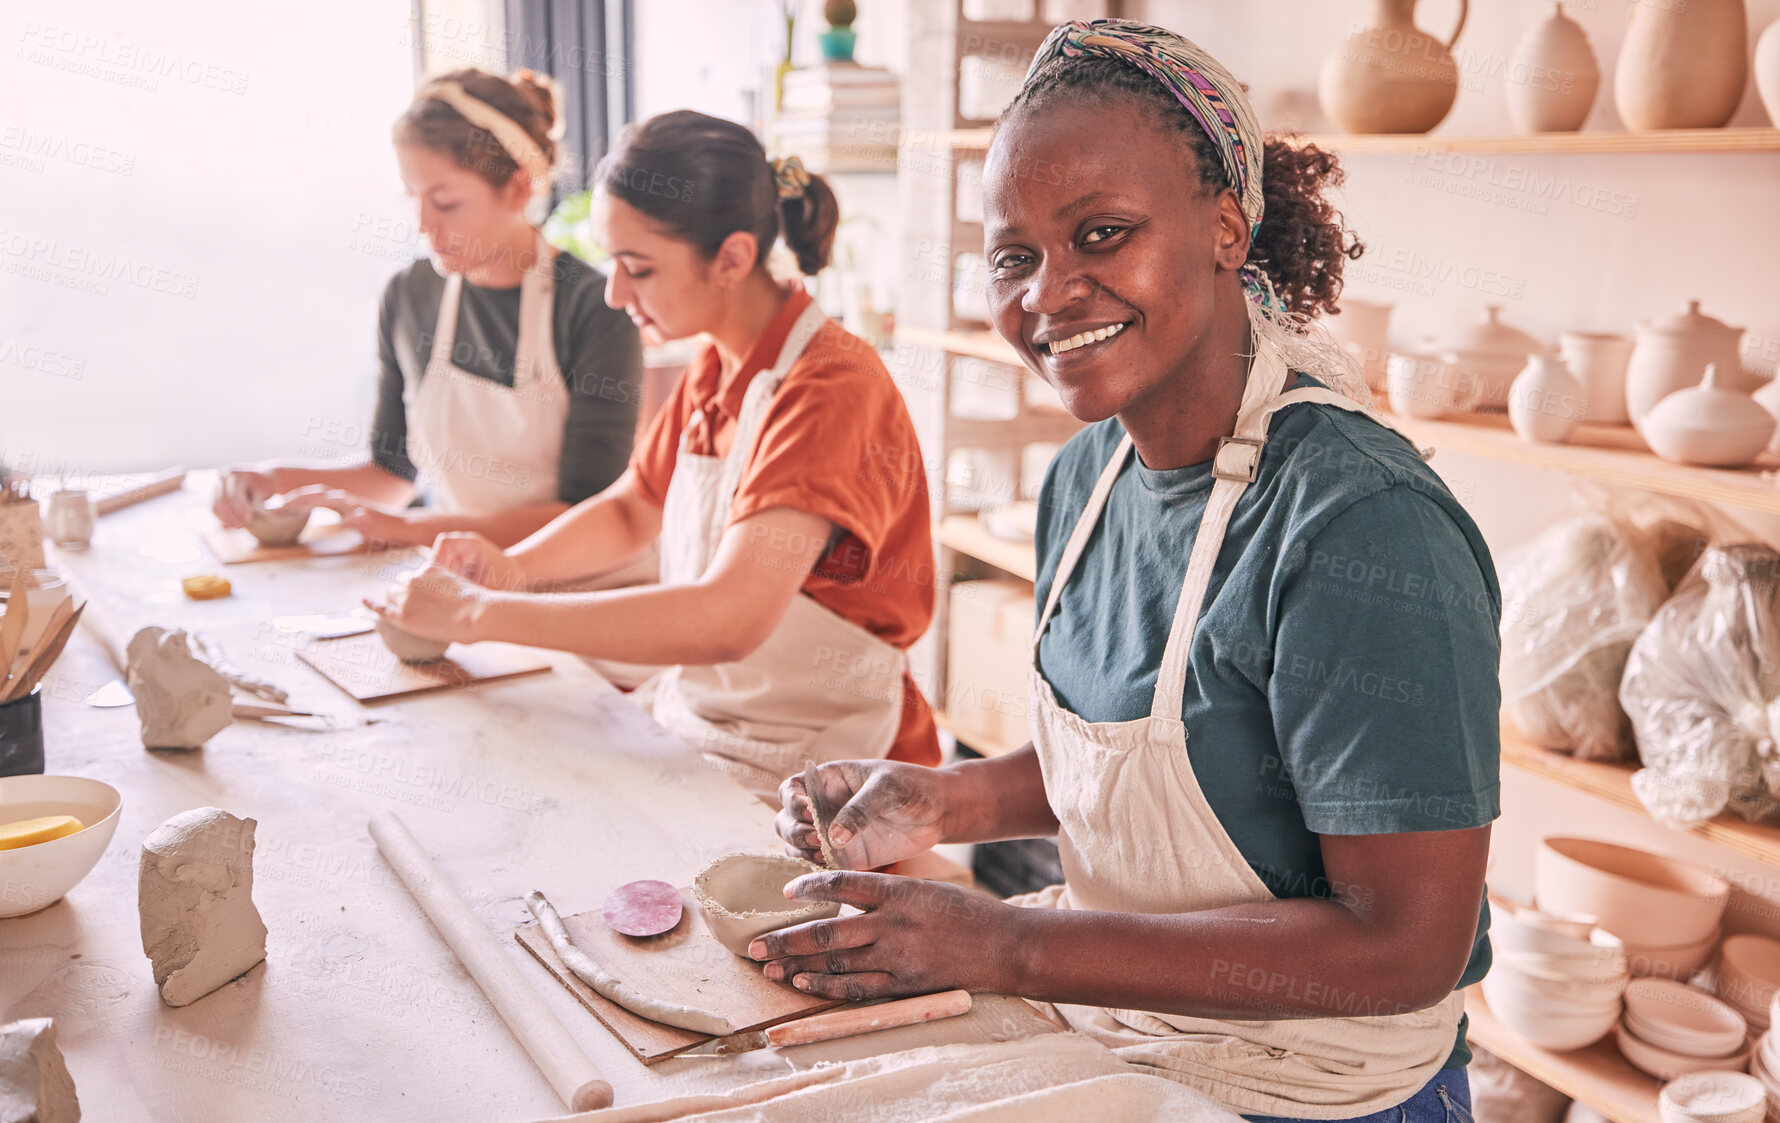 Buy stock photo Pottery class, group workshop or portrait woman design ceramic mold, clay manufacturing or art product. Diversity studio, retail sales store or startup small business owner or African artist molding